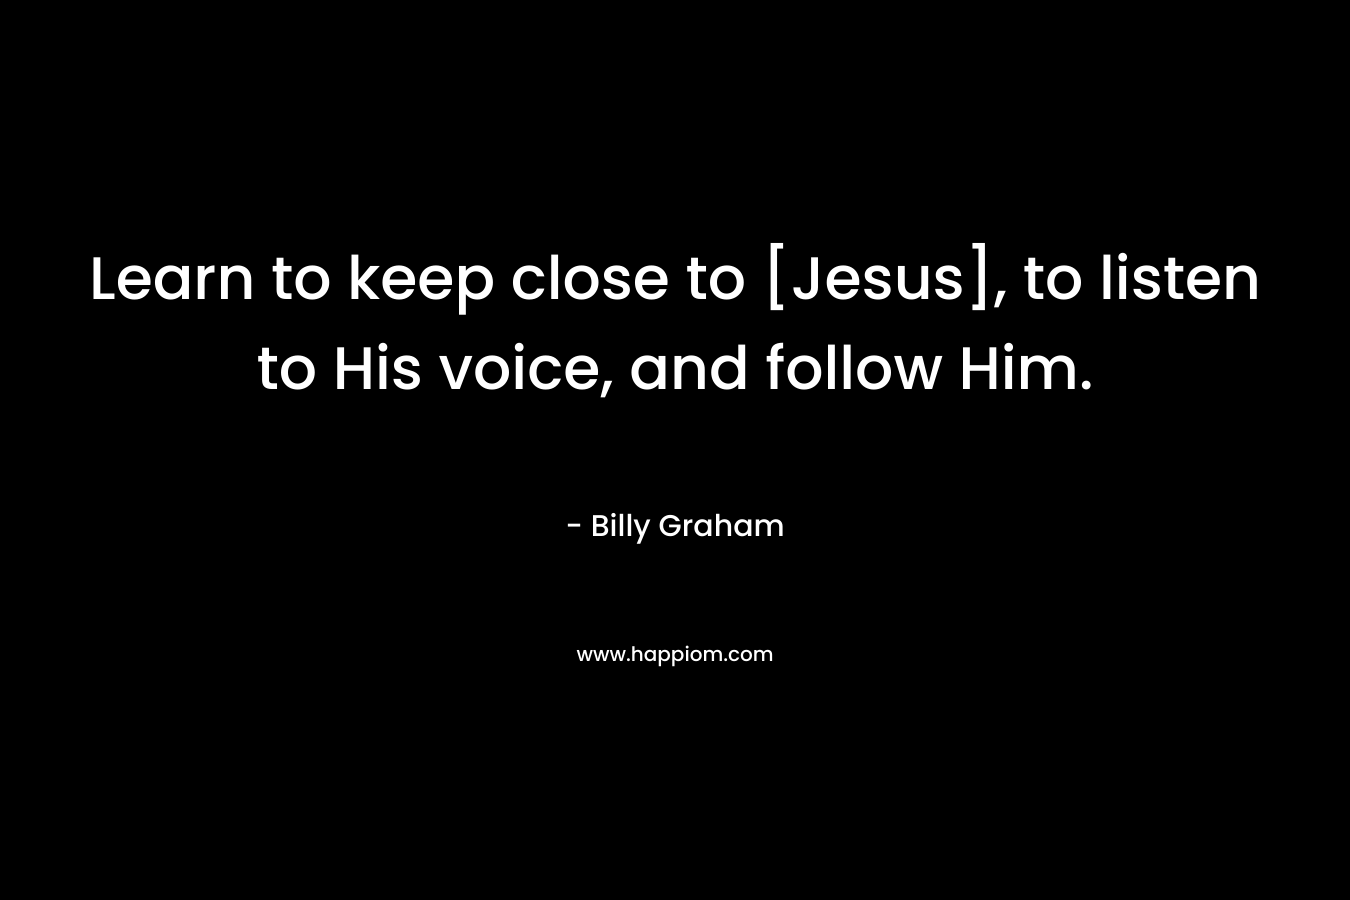 Learn to keep close to [Jesus], to listen to His voice, and follow Him.